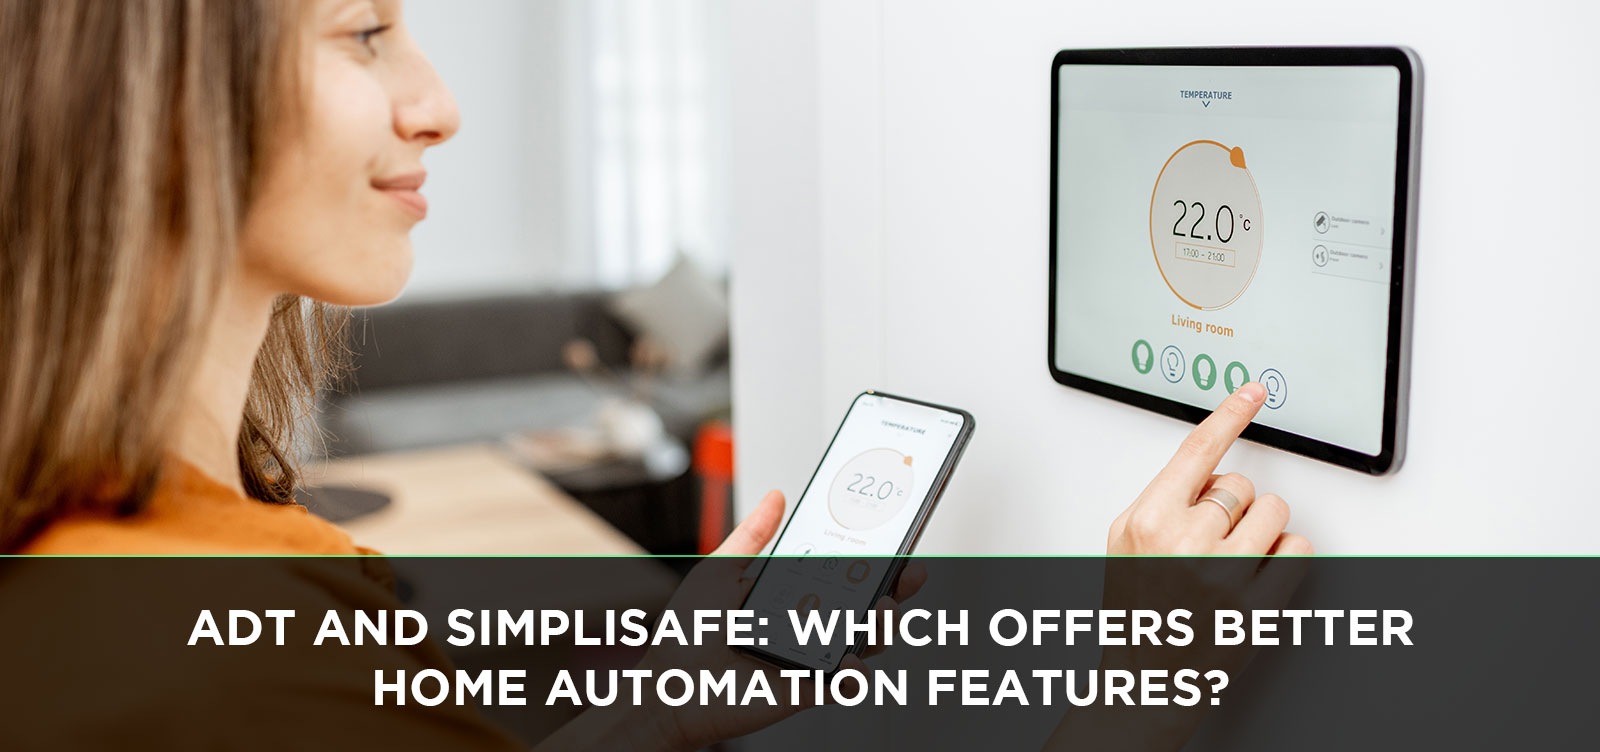 ADT and SimpliSafe